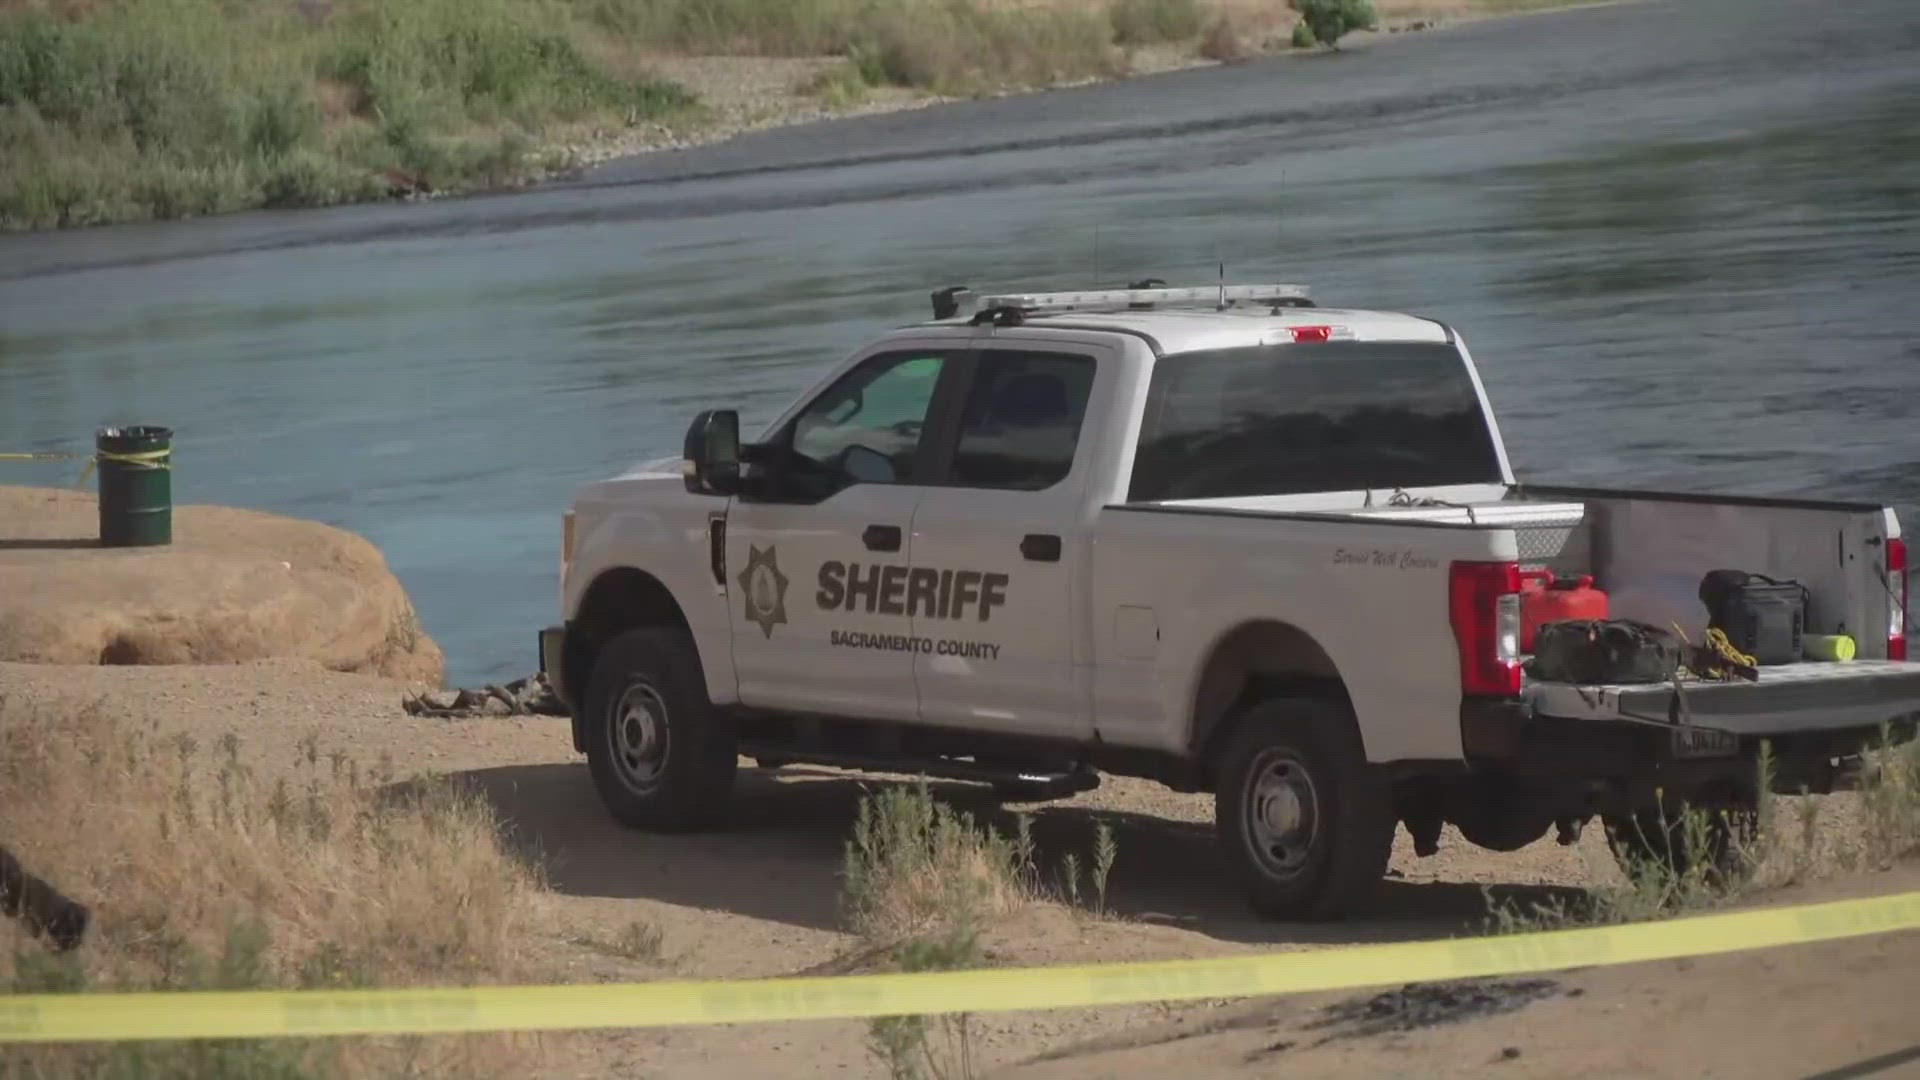 A teenager's body was recovered from the American River in Rancho Cordova Wednesday after going missing.